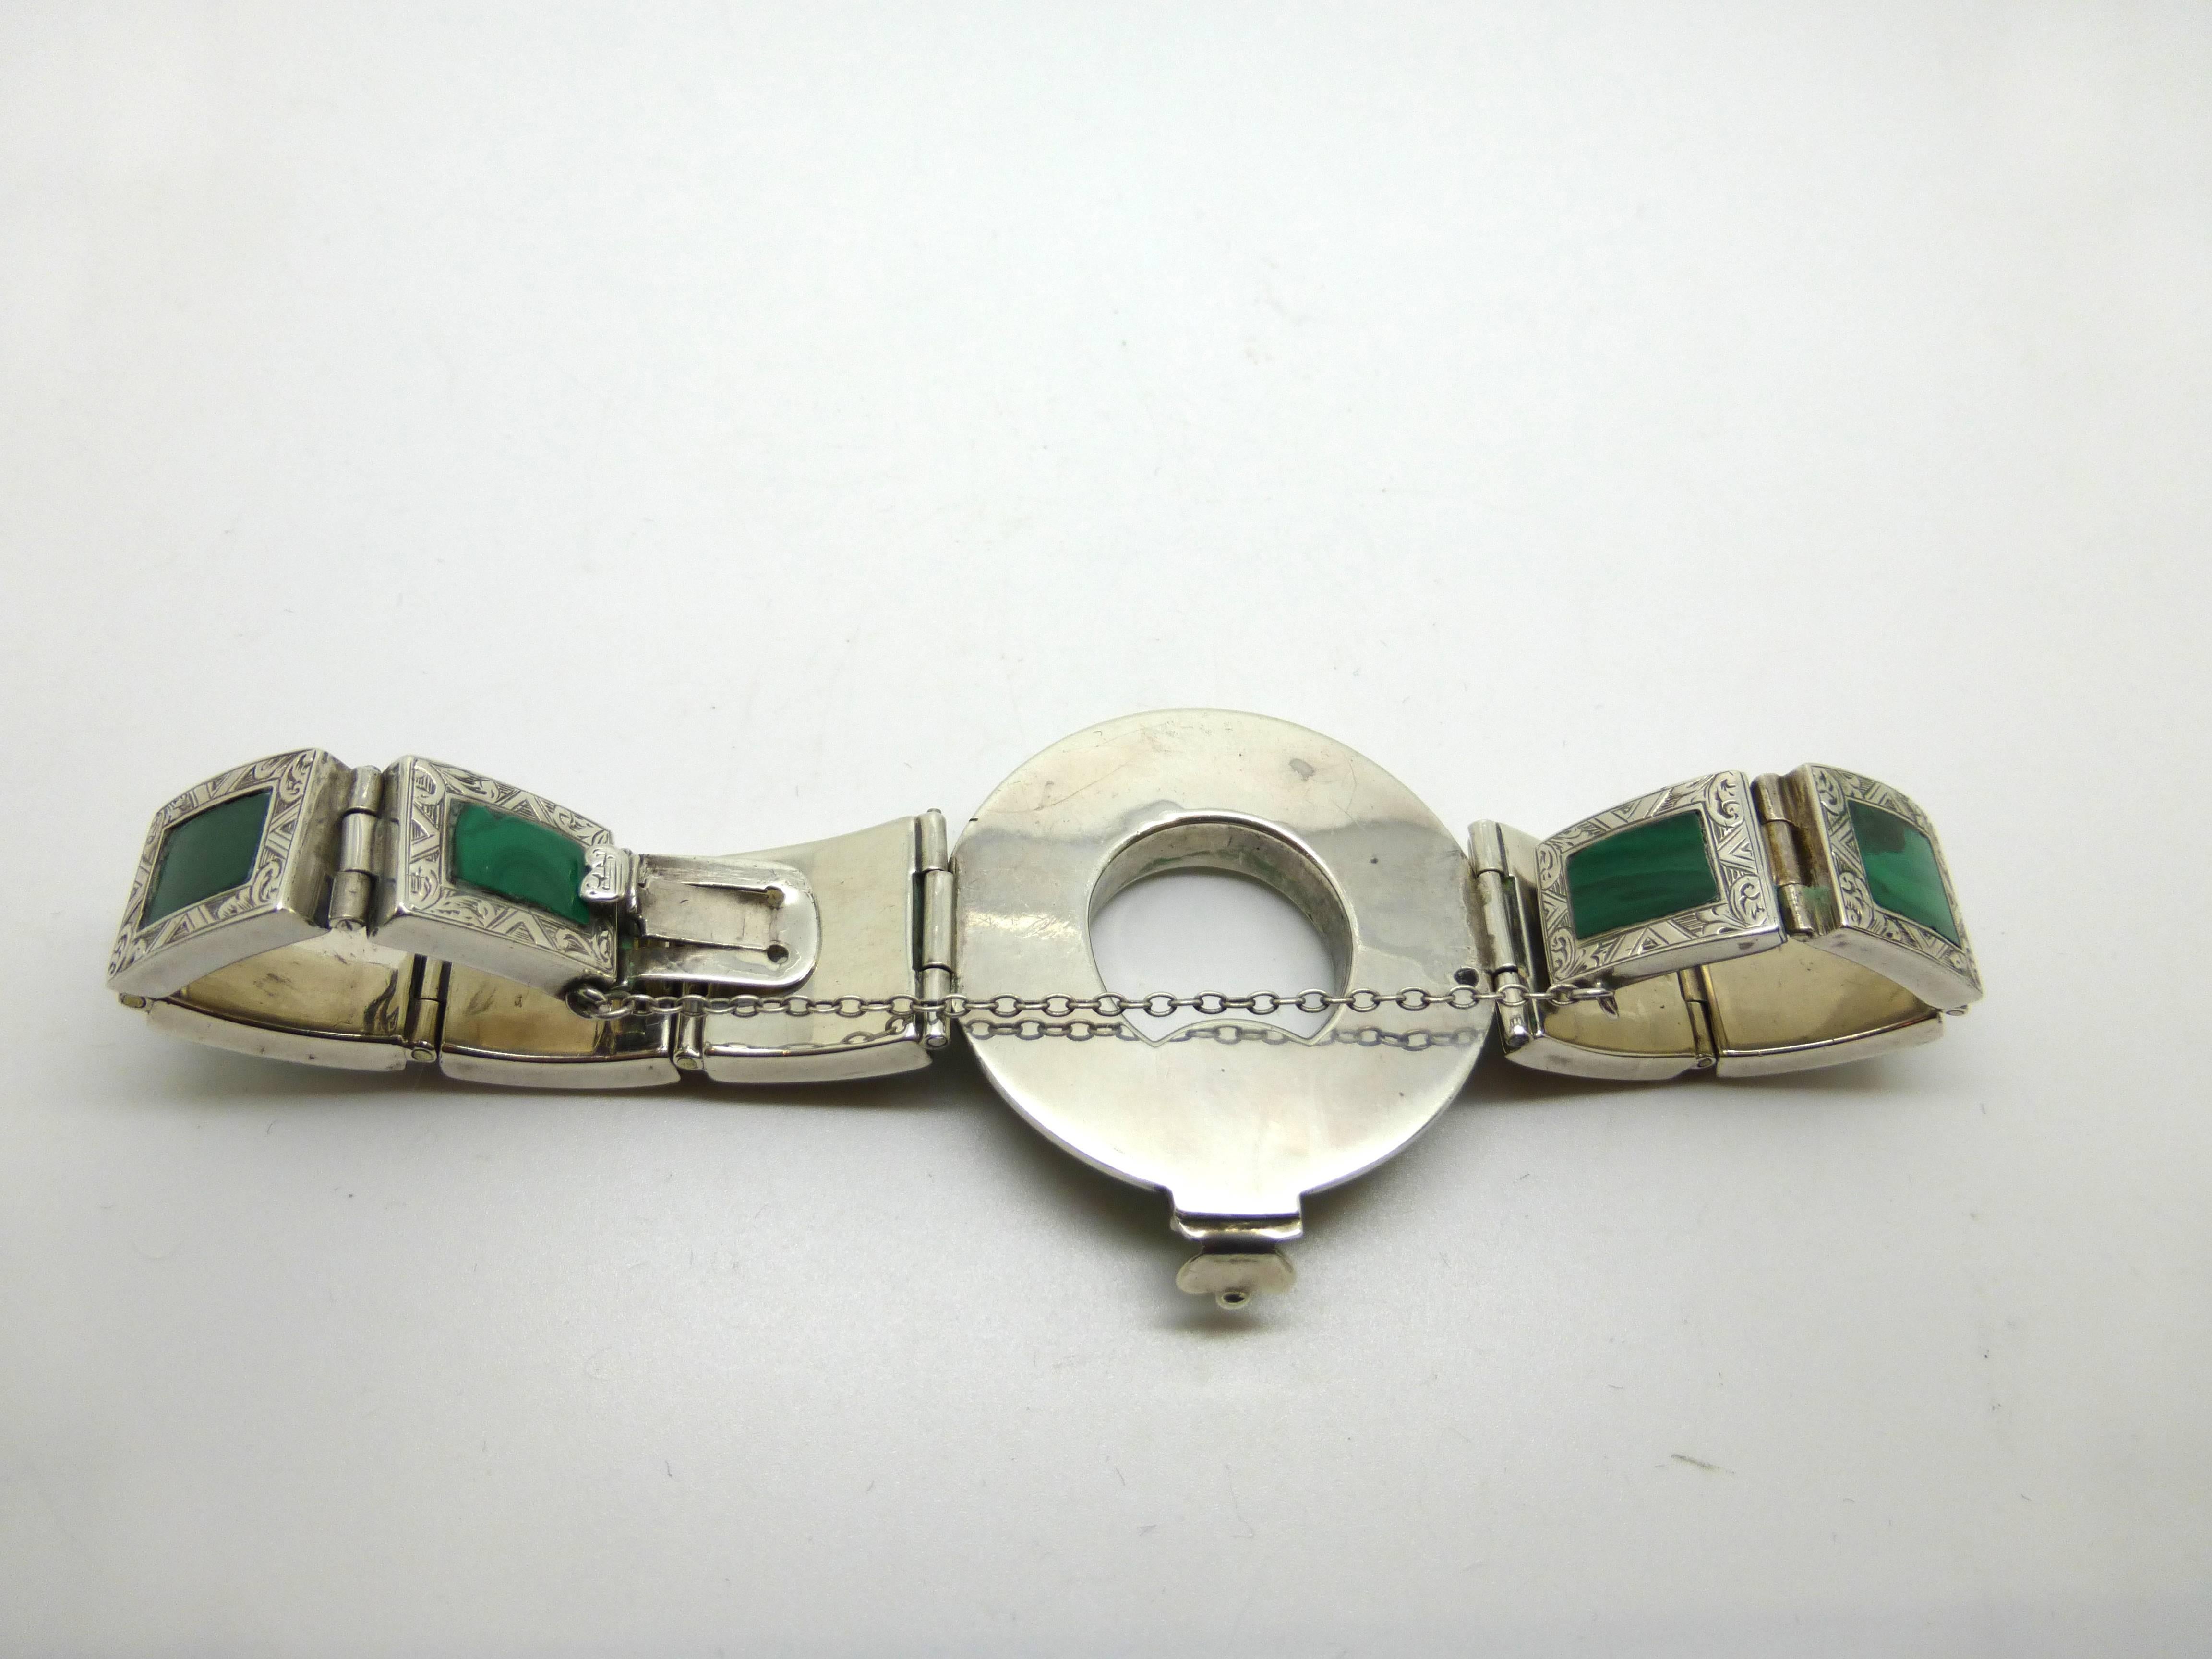 Rare and unusual, Victorian, sterling silver-mounted (unmarked, but tested) Scottish agate (Malachite)  bracelet, Scotland, Ca. 1880's - 1890's. Sterling silver has beautiful etched design. Round section measures @1 1/2